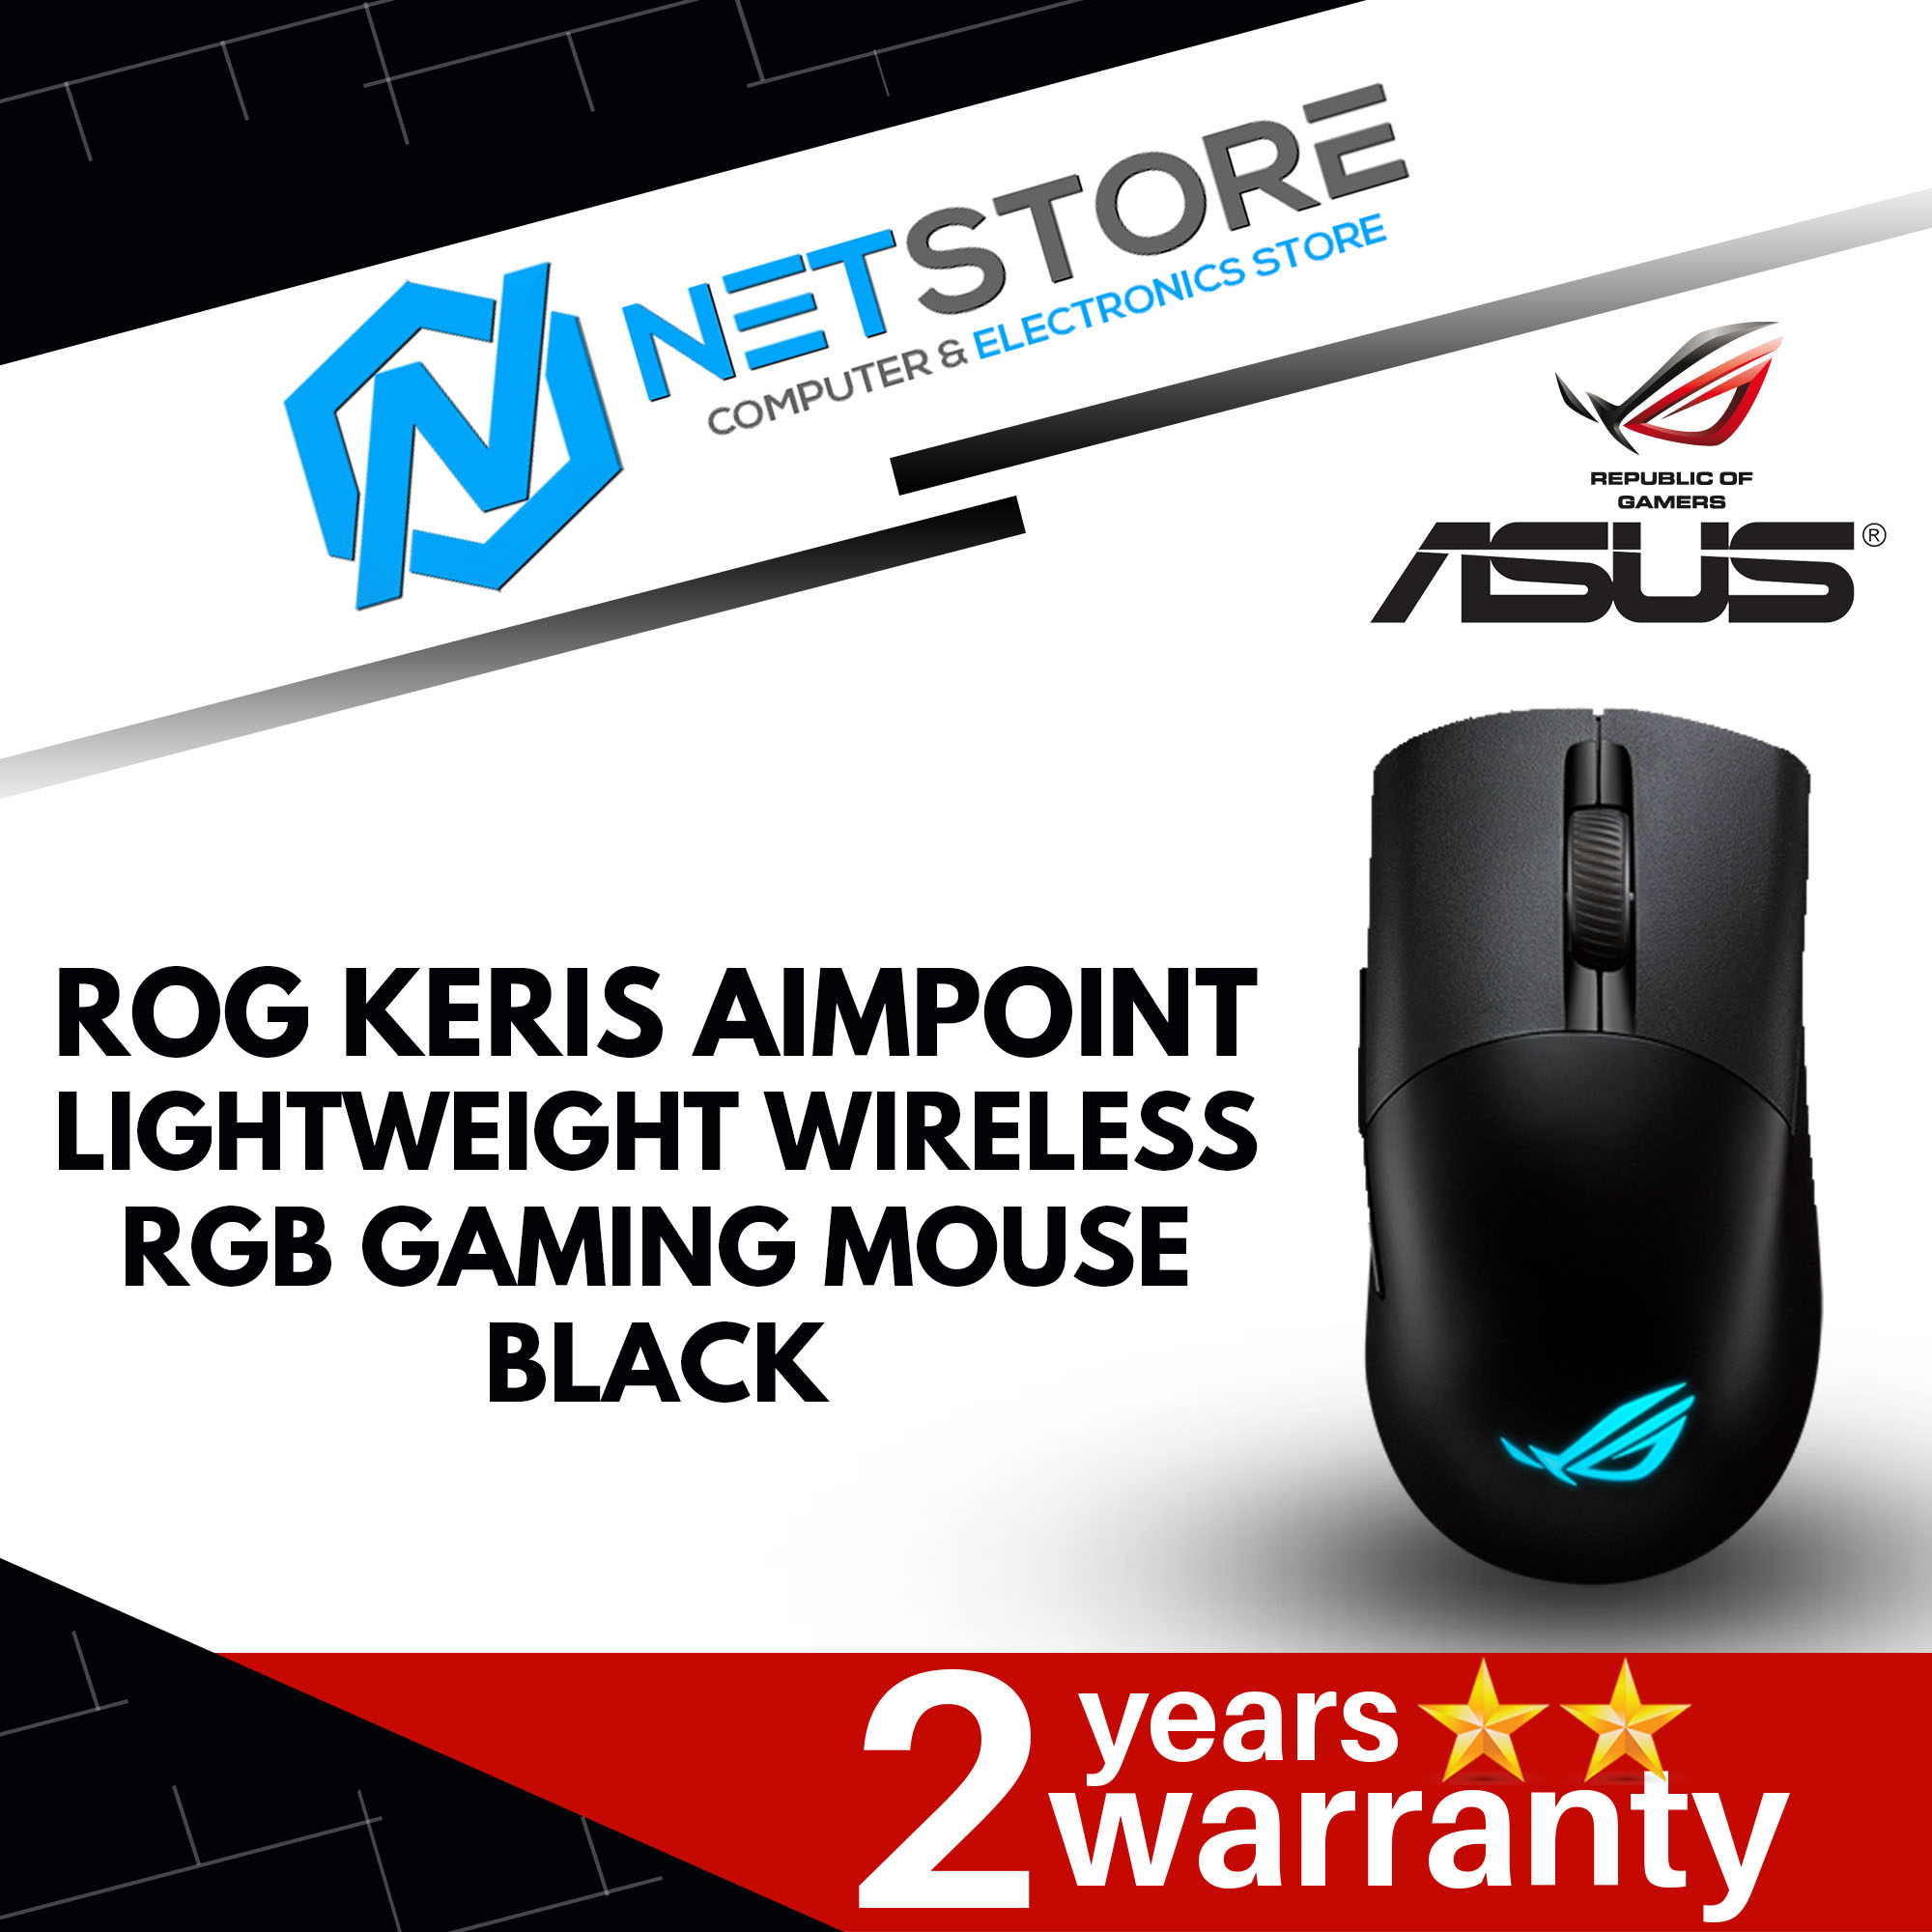 ASUS P709 ROG KERIS AIMPOINT WIRELESS RGB GAMING MOUSE - BLACK